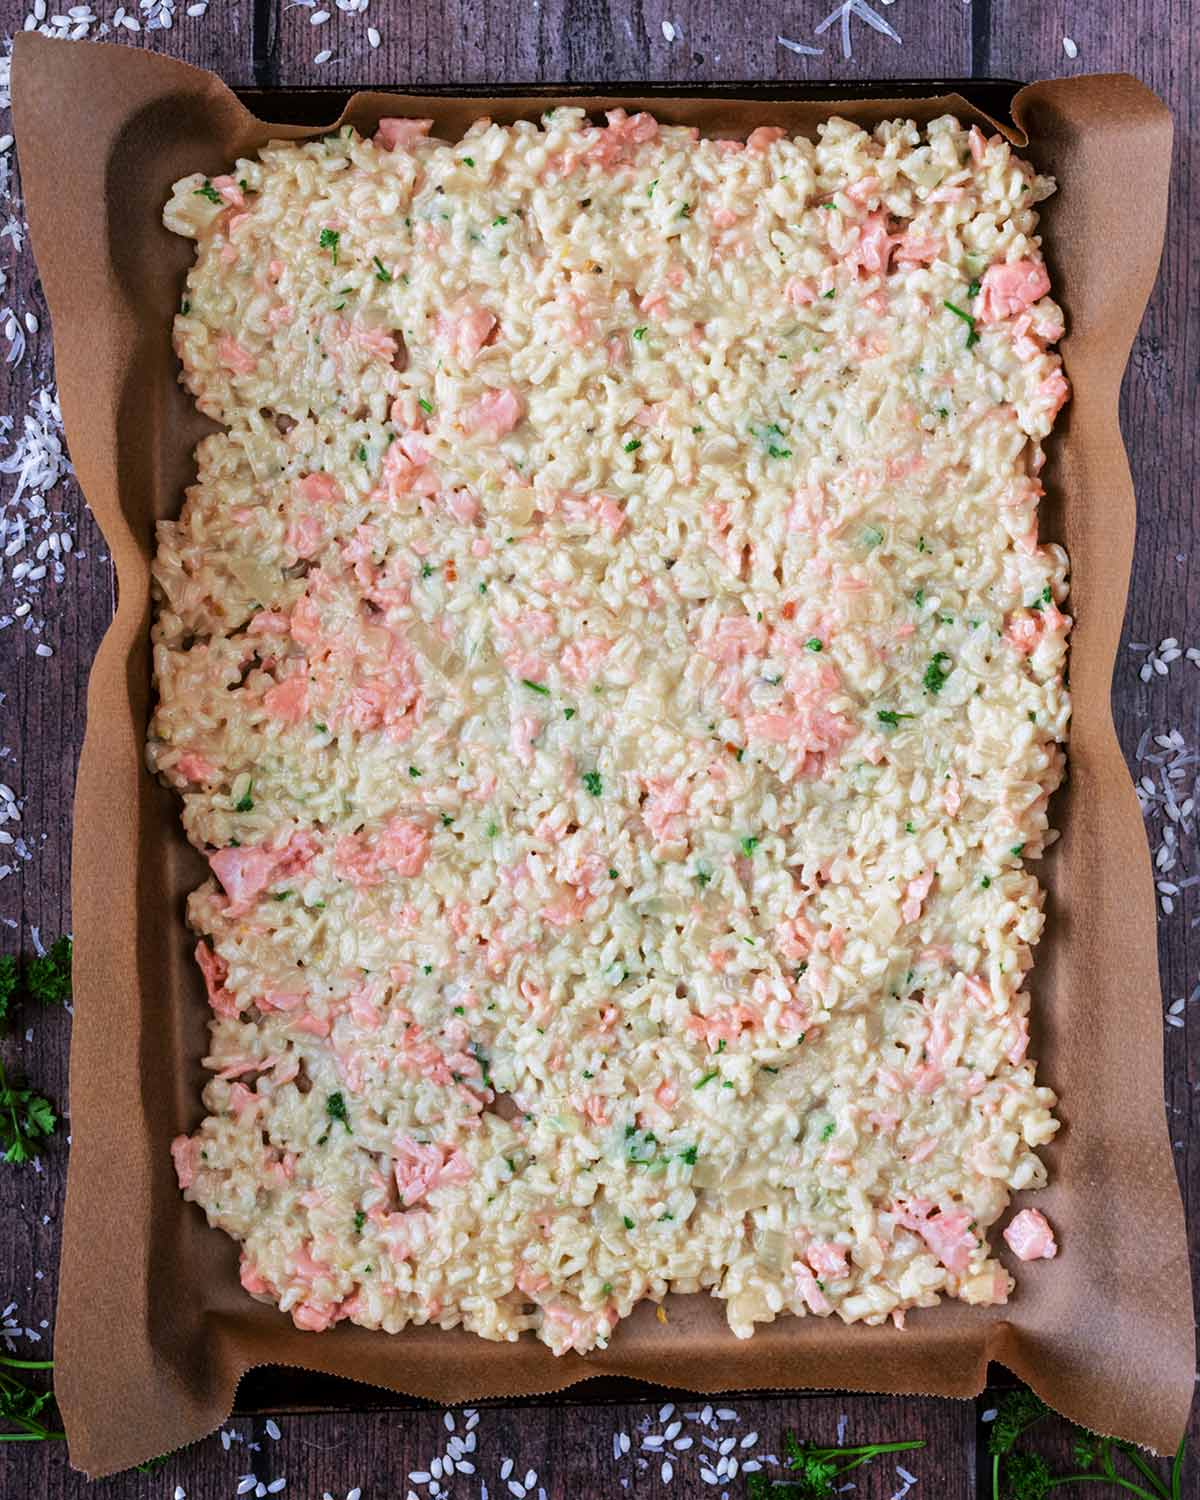 Salmon risotto spread out over a large lined baking sheet.